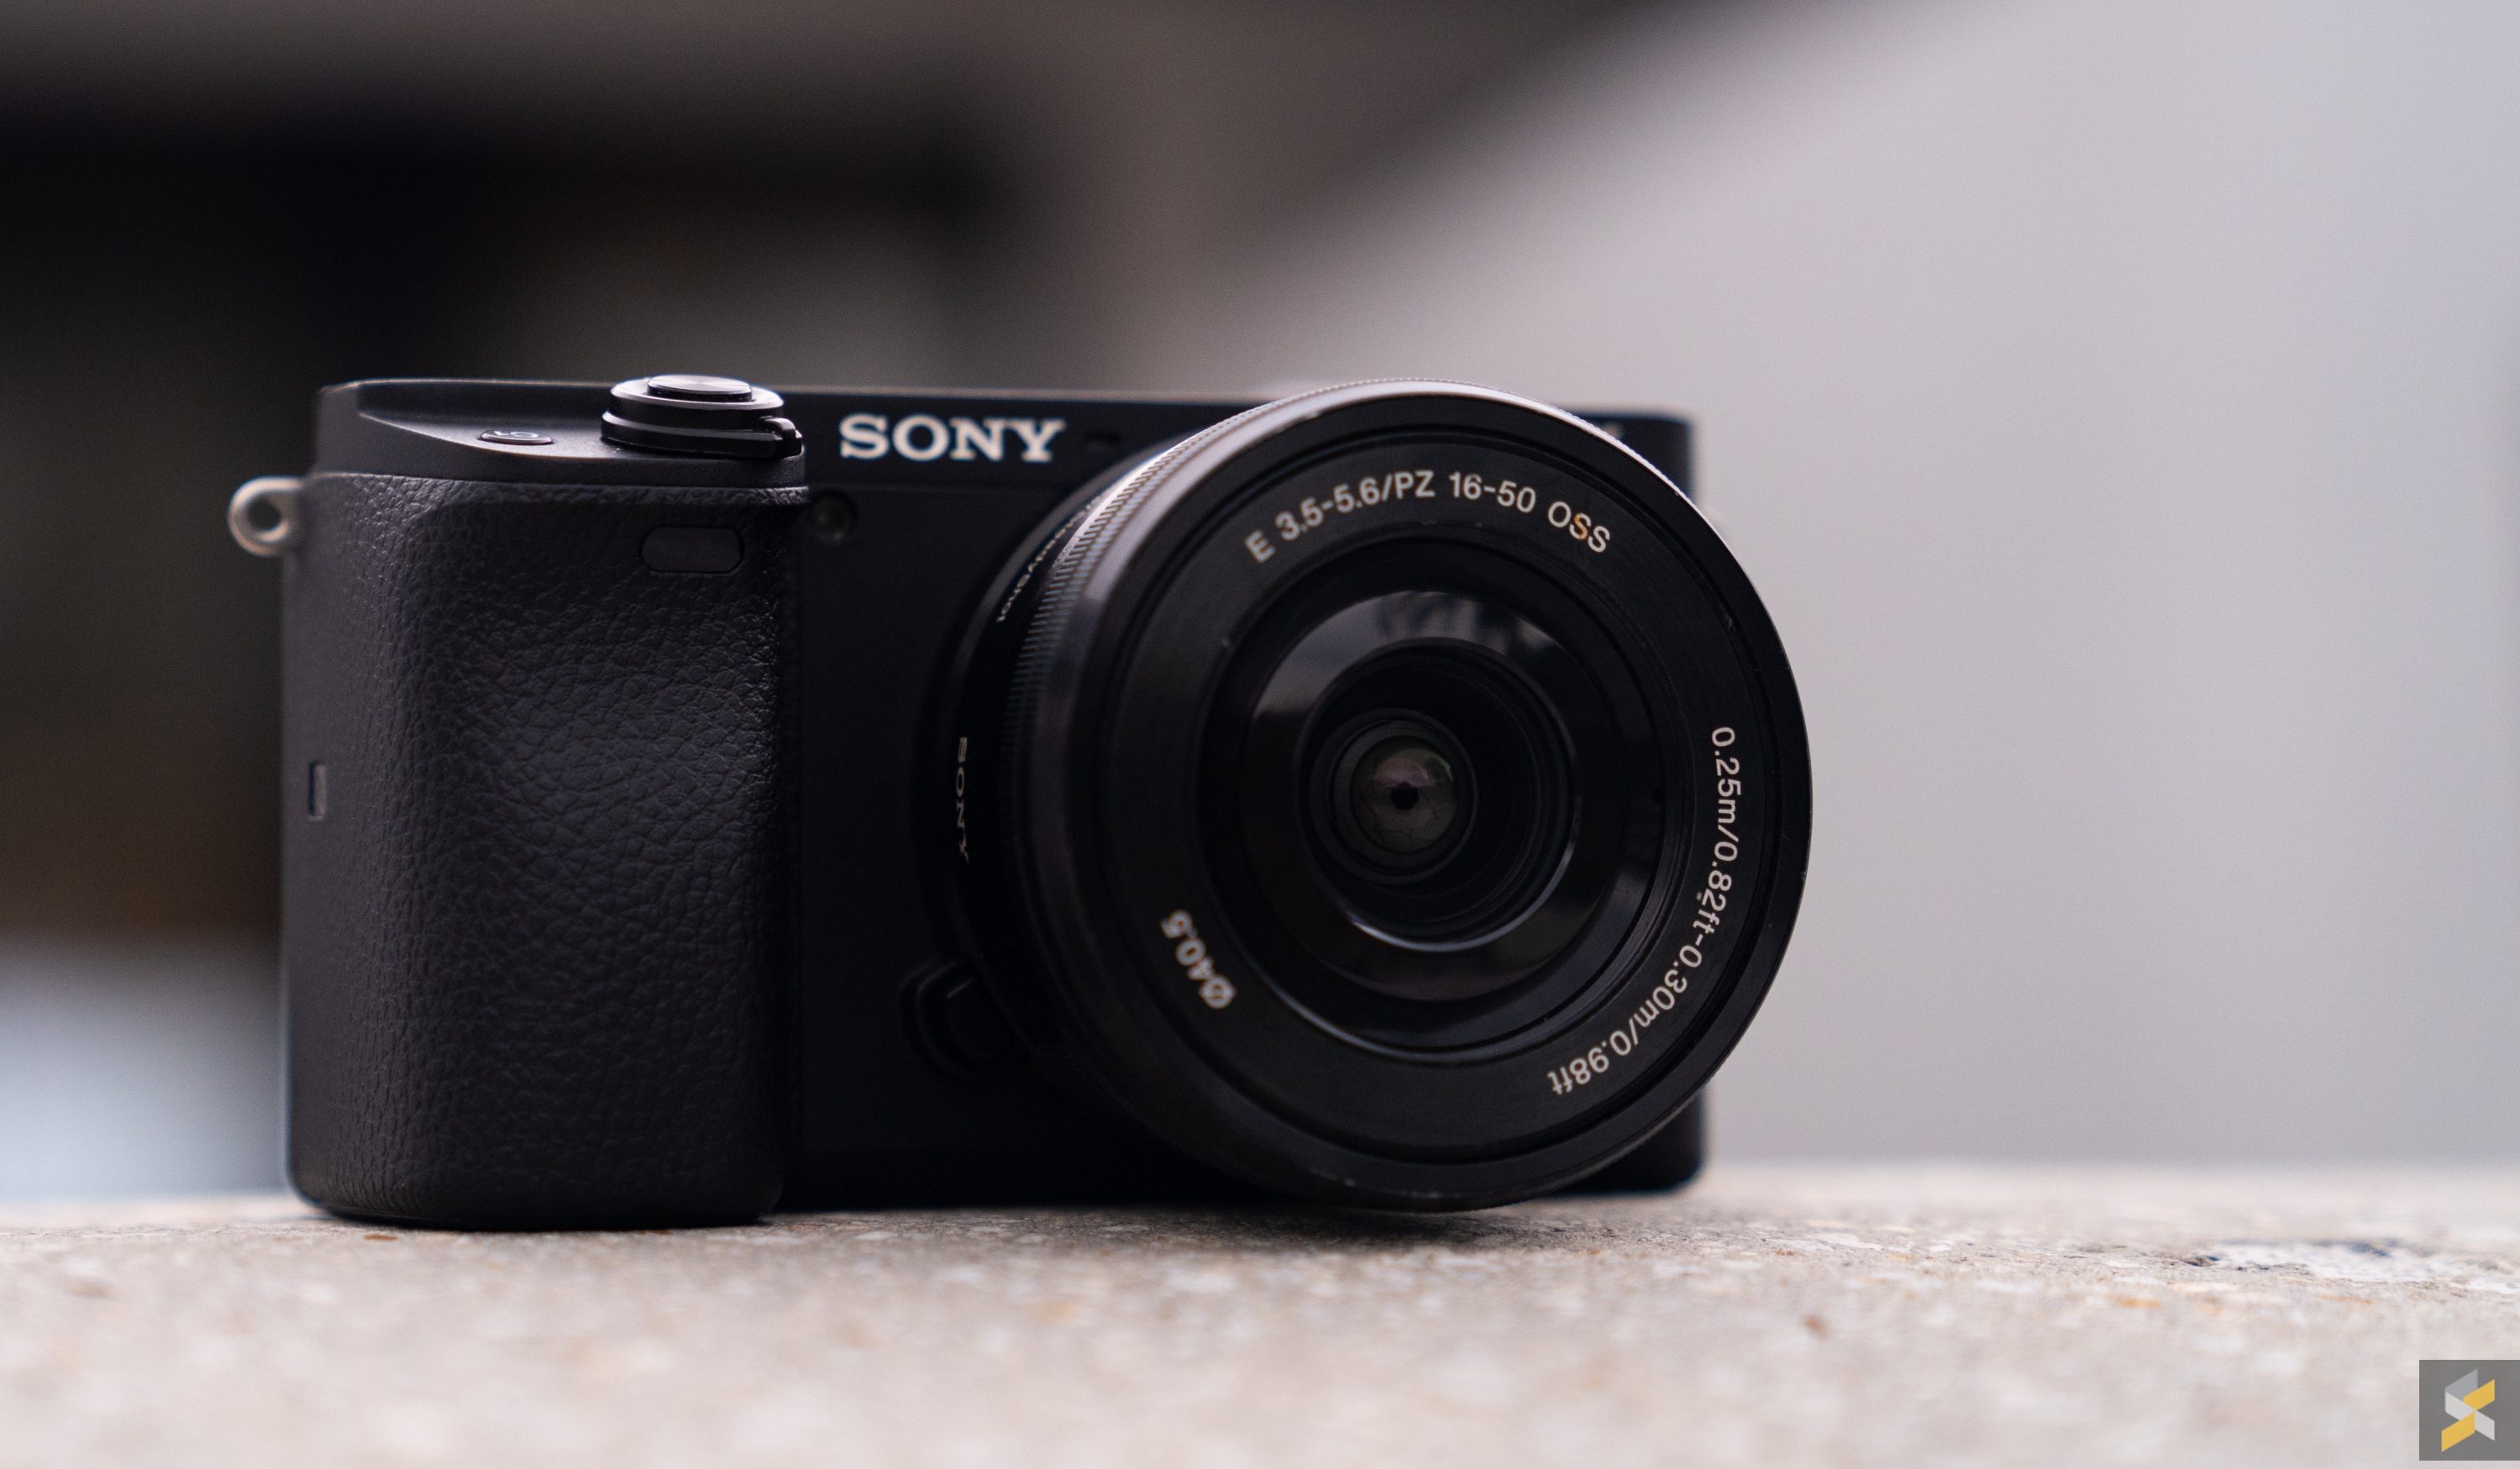 Sony A6400 review: Finally, a Sony camera I actually want to buy